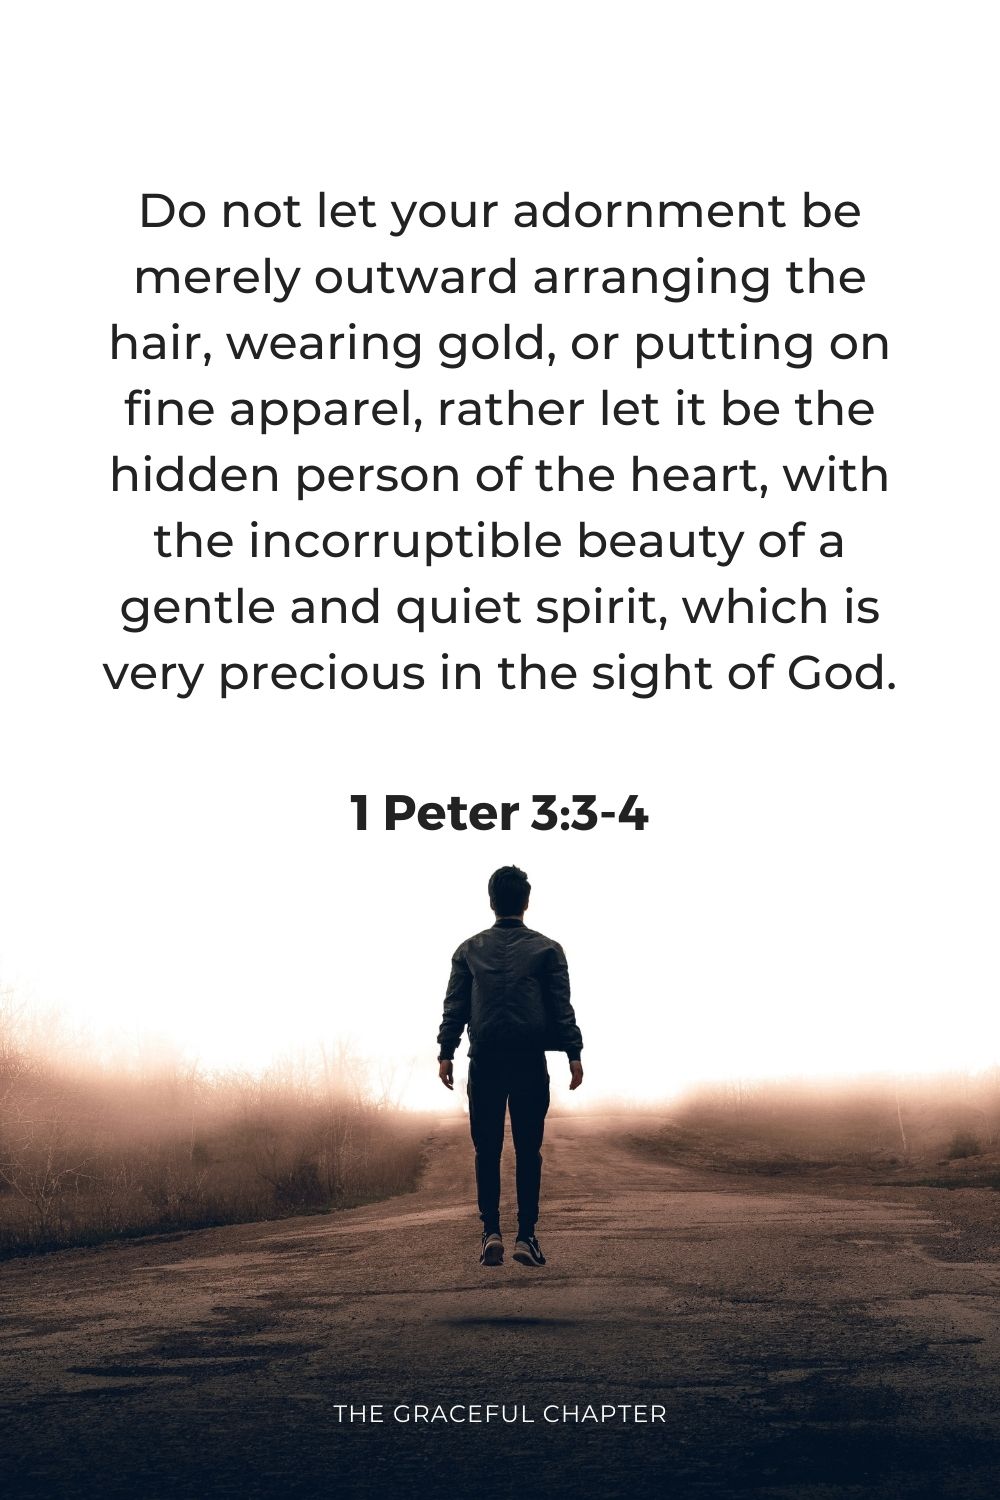 Do not let your adornment be merely outward arranging the hair, wearing gold, or putting on fine apparel, rather let it be the hidden person of the heart, with the incorruptible beauty of a gentle and quiet spirit, which is very precious in the sight of God.